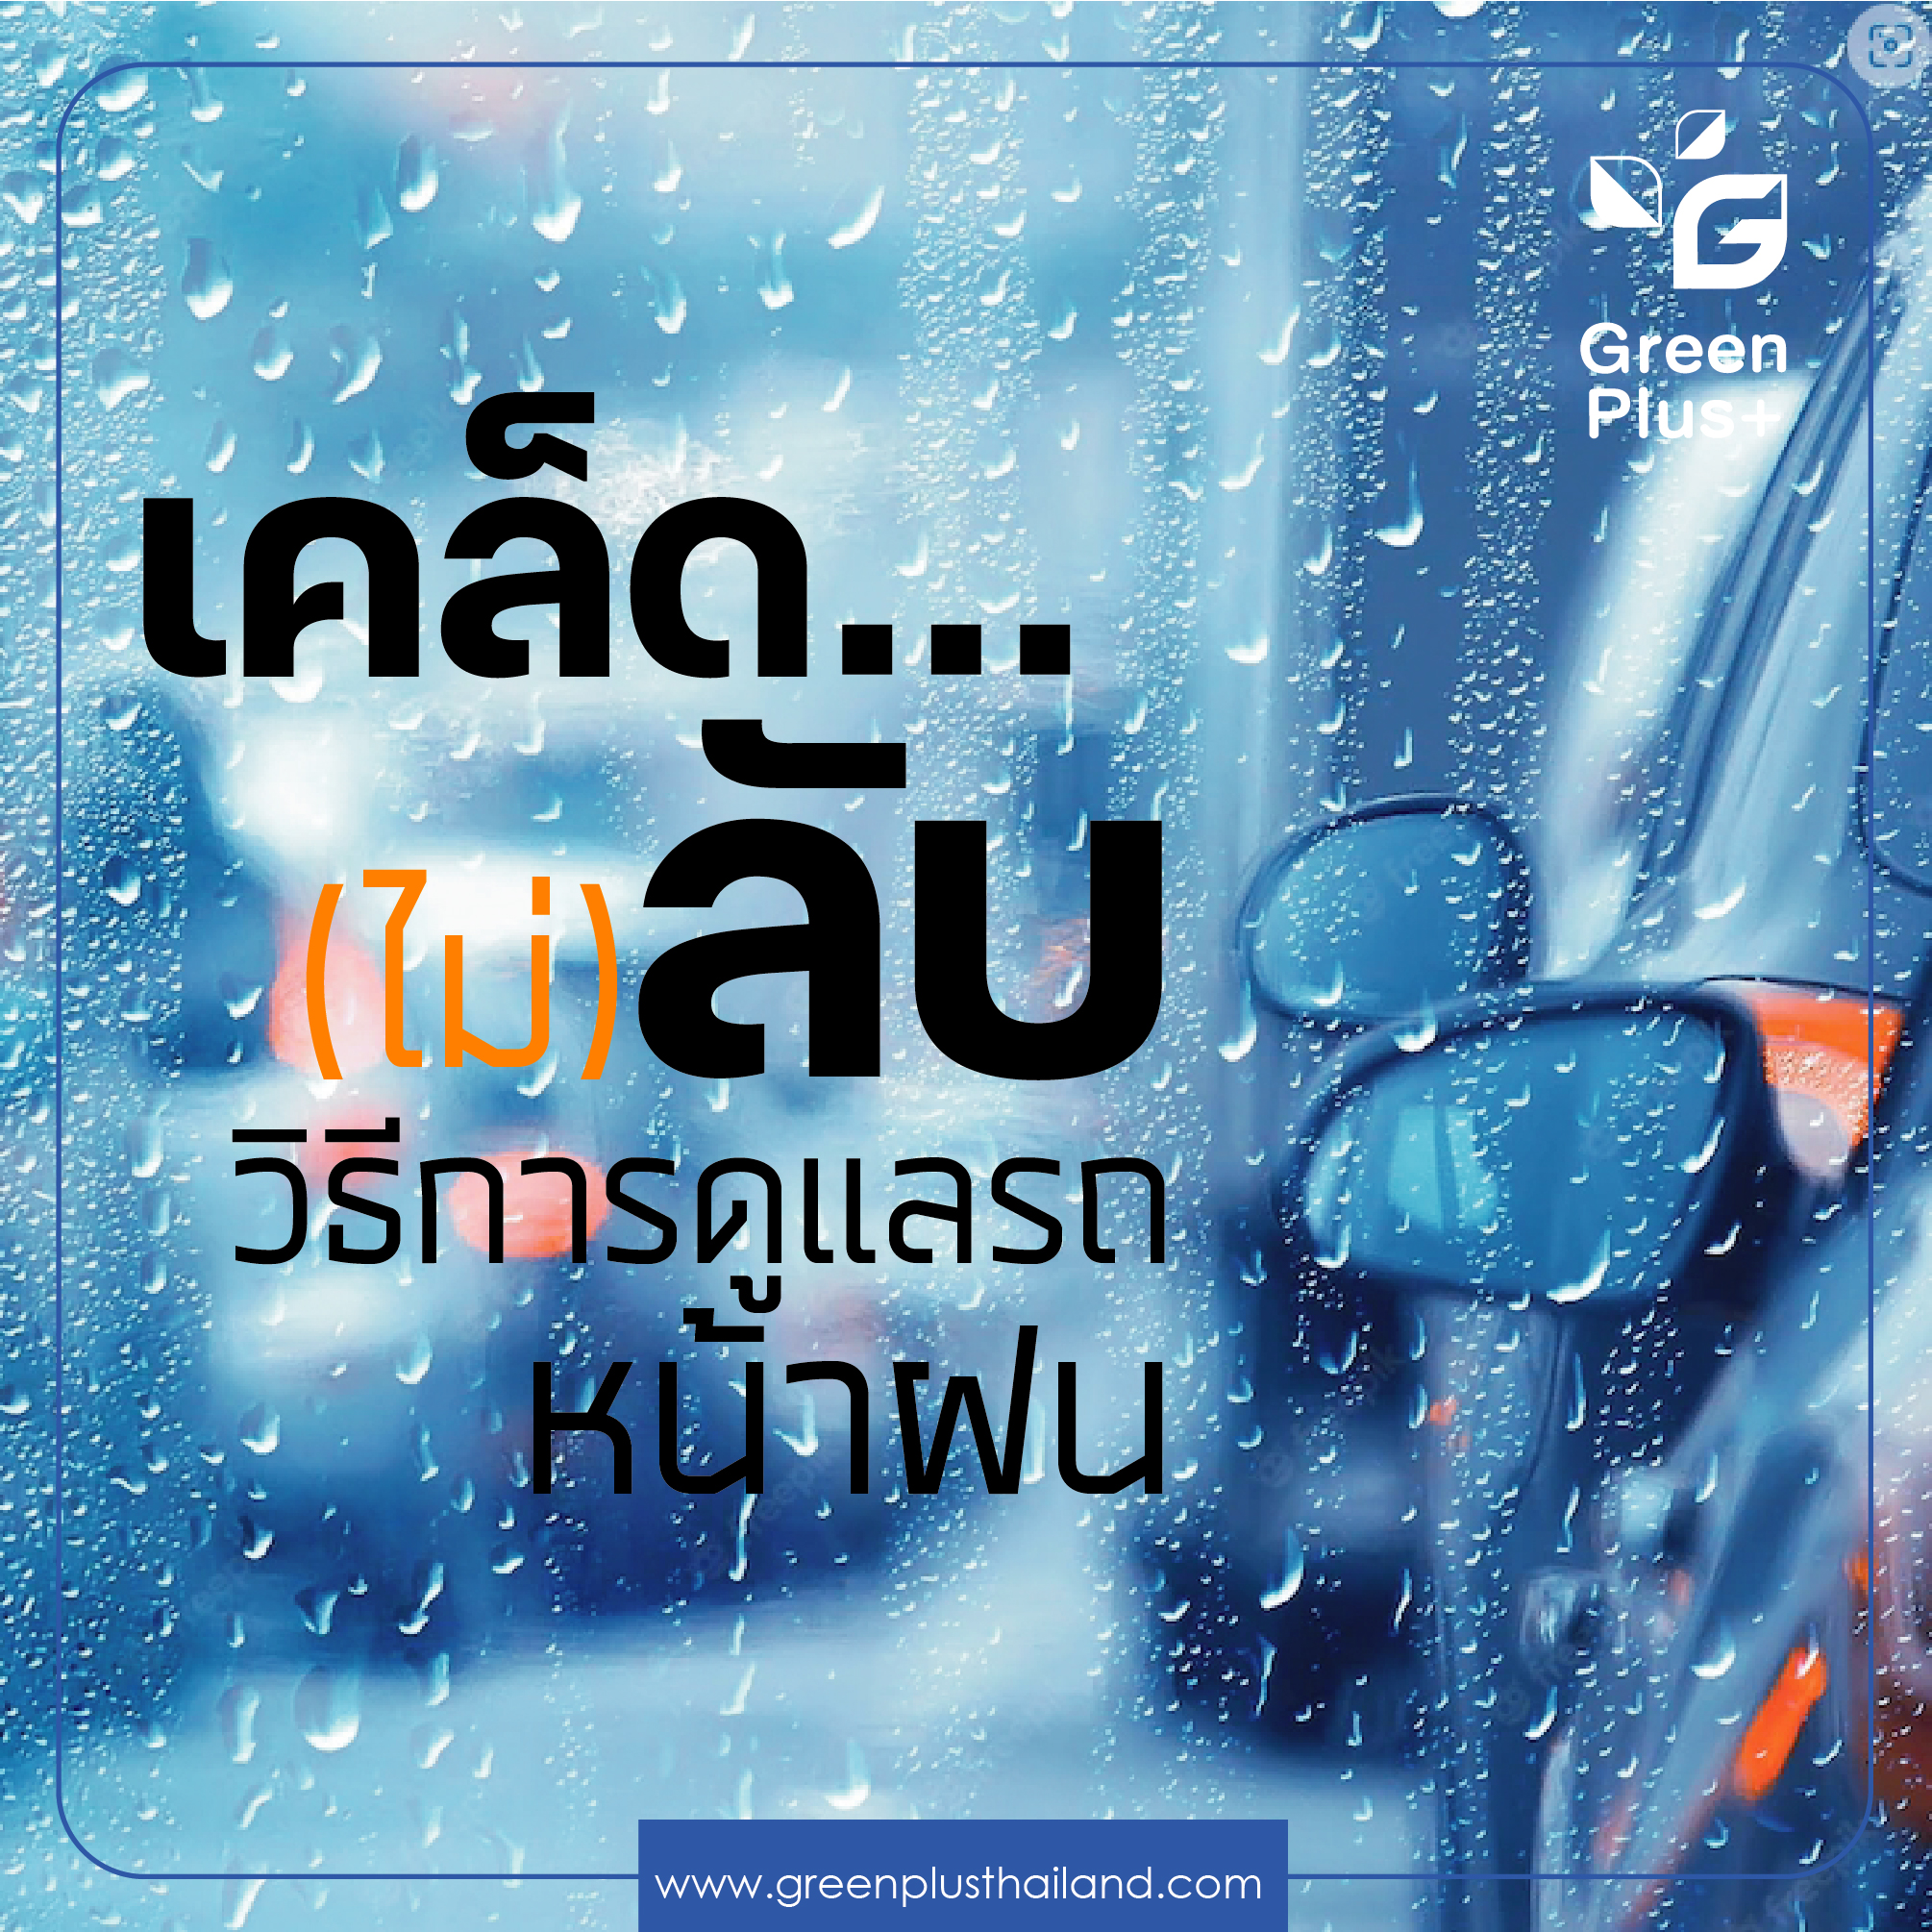 (NOT) SECRET TIPS... How to take care your car in the rainy season.